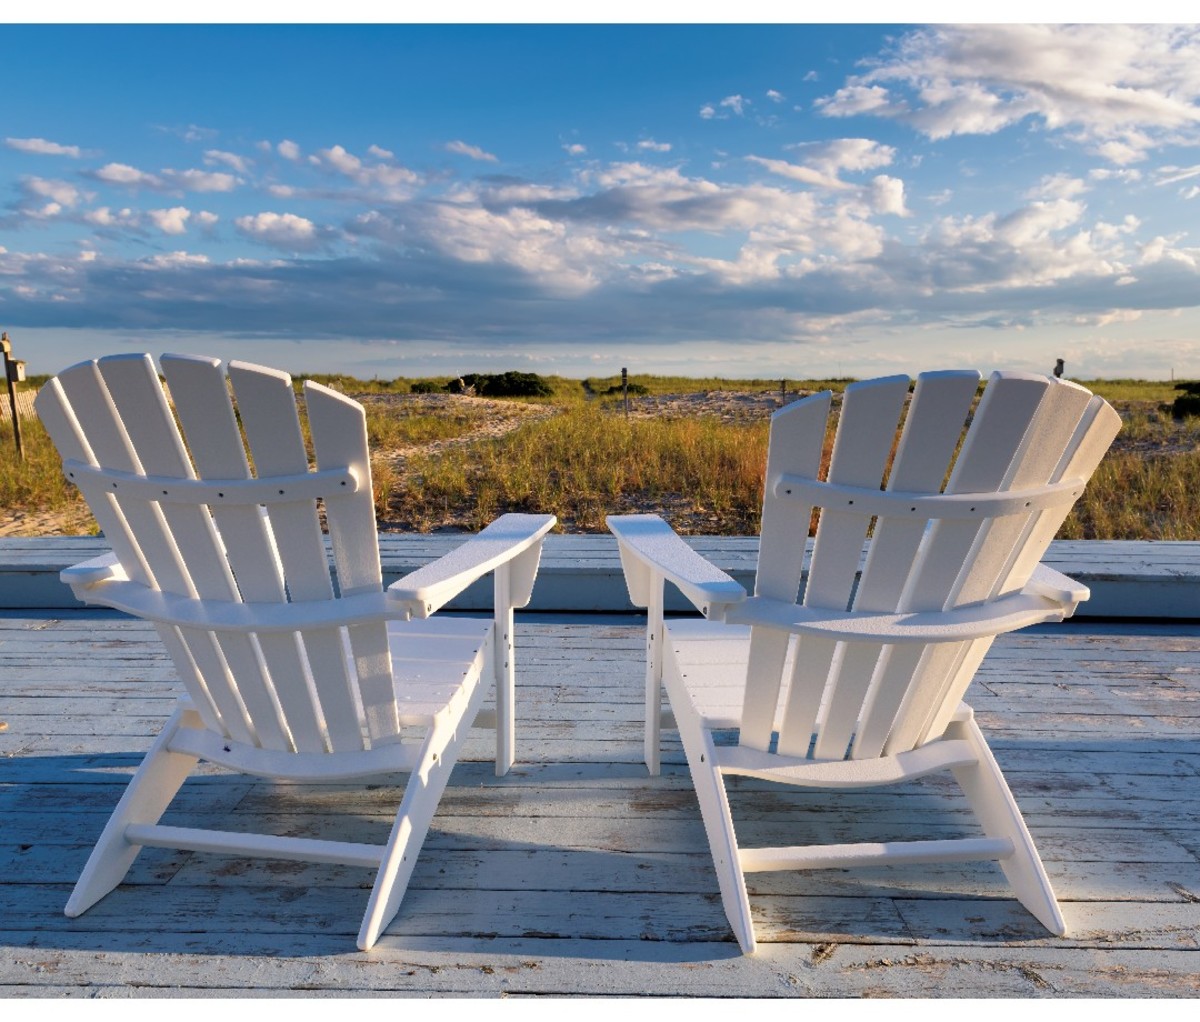 A pair of empty white Adirondack chairs on a porch in Cape Cod overlooking the water.